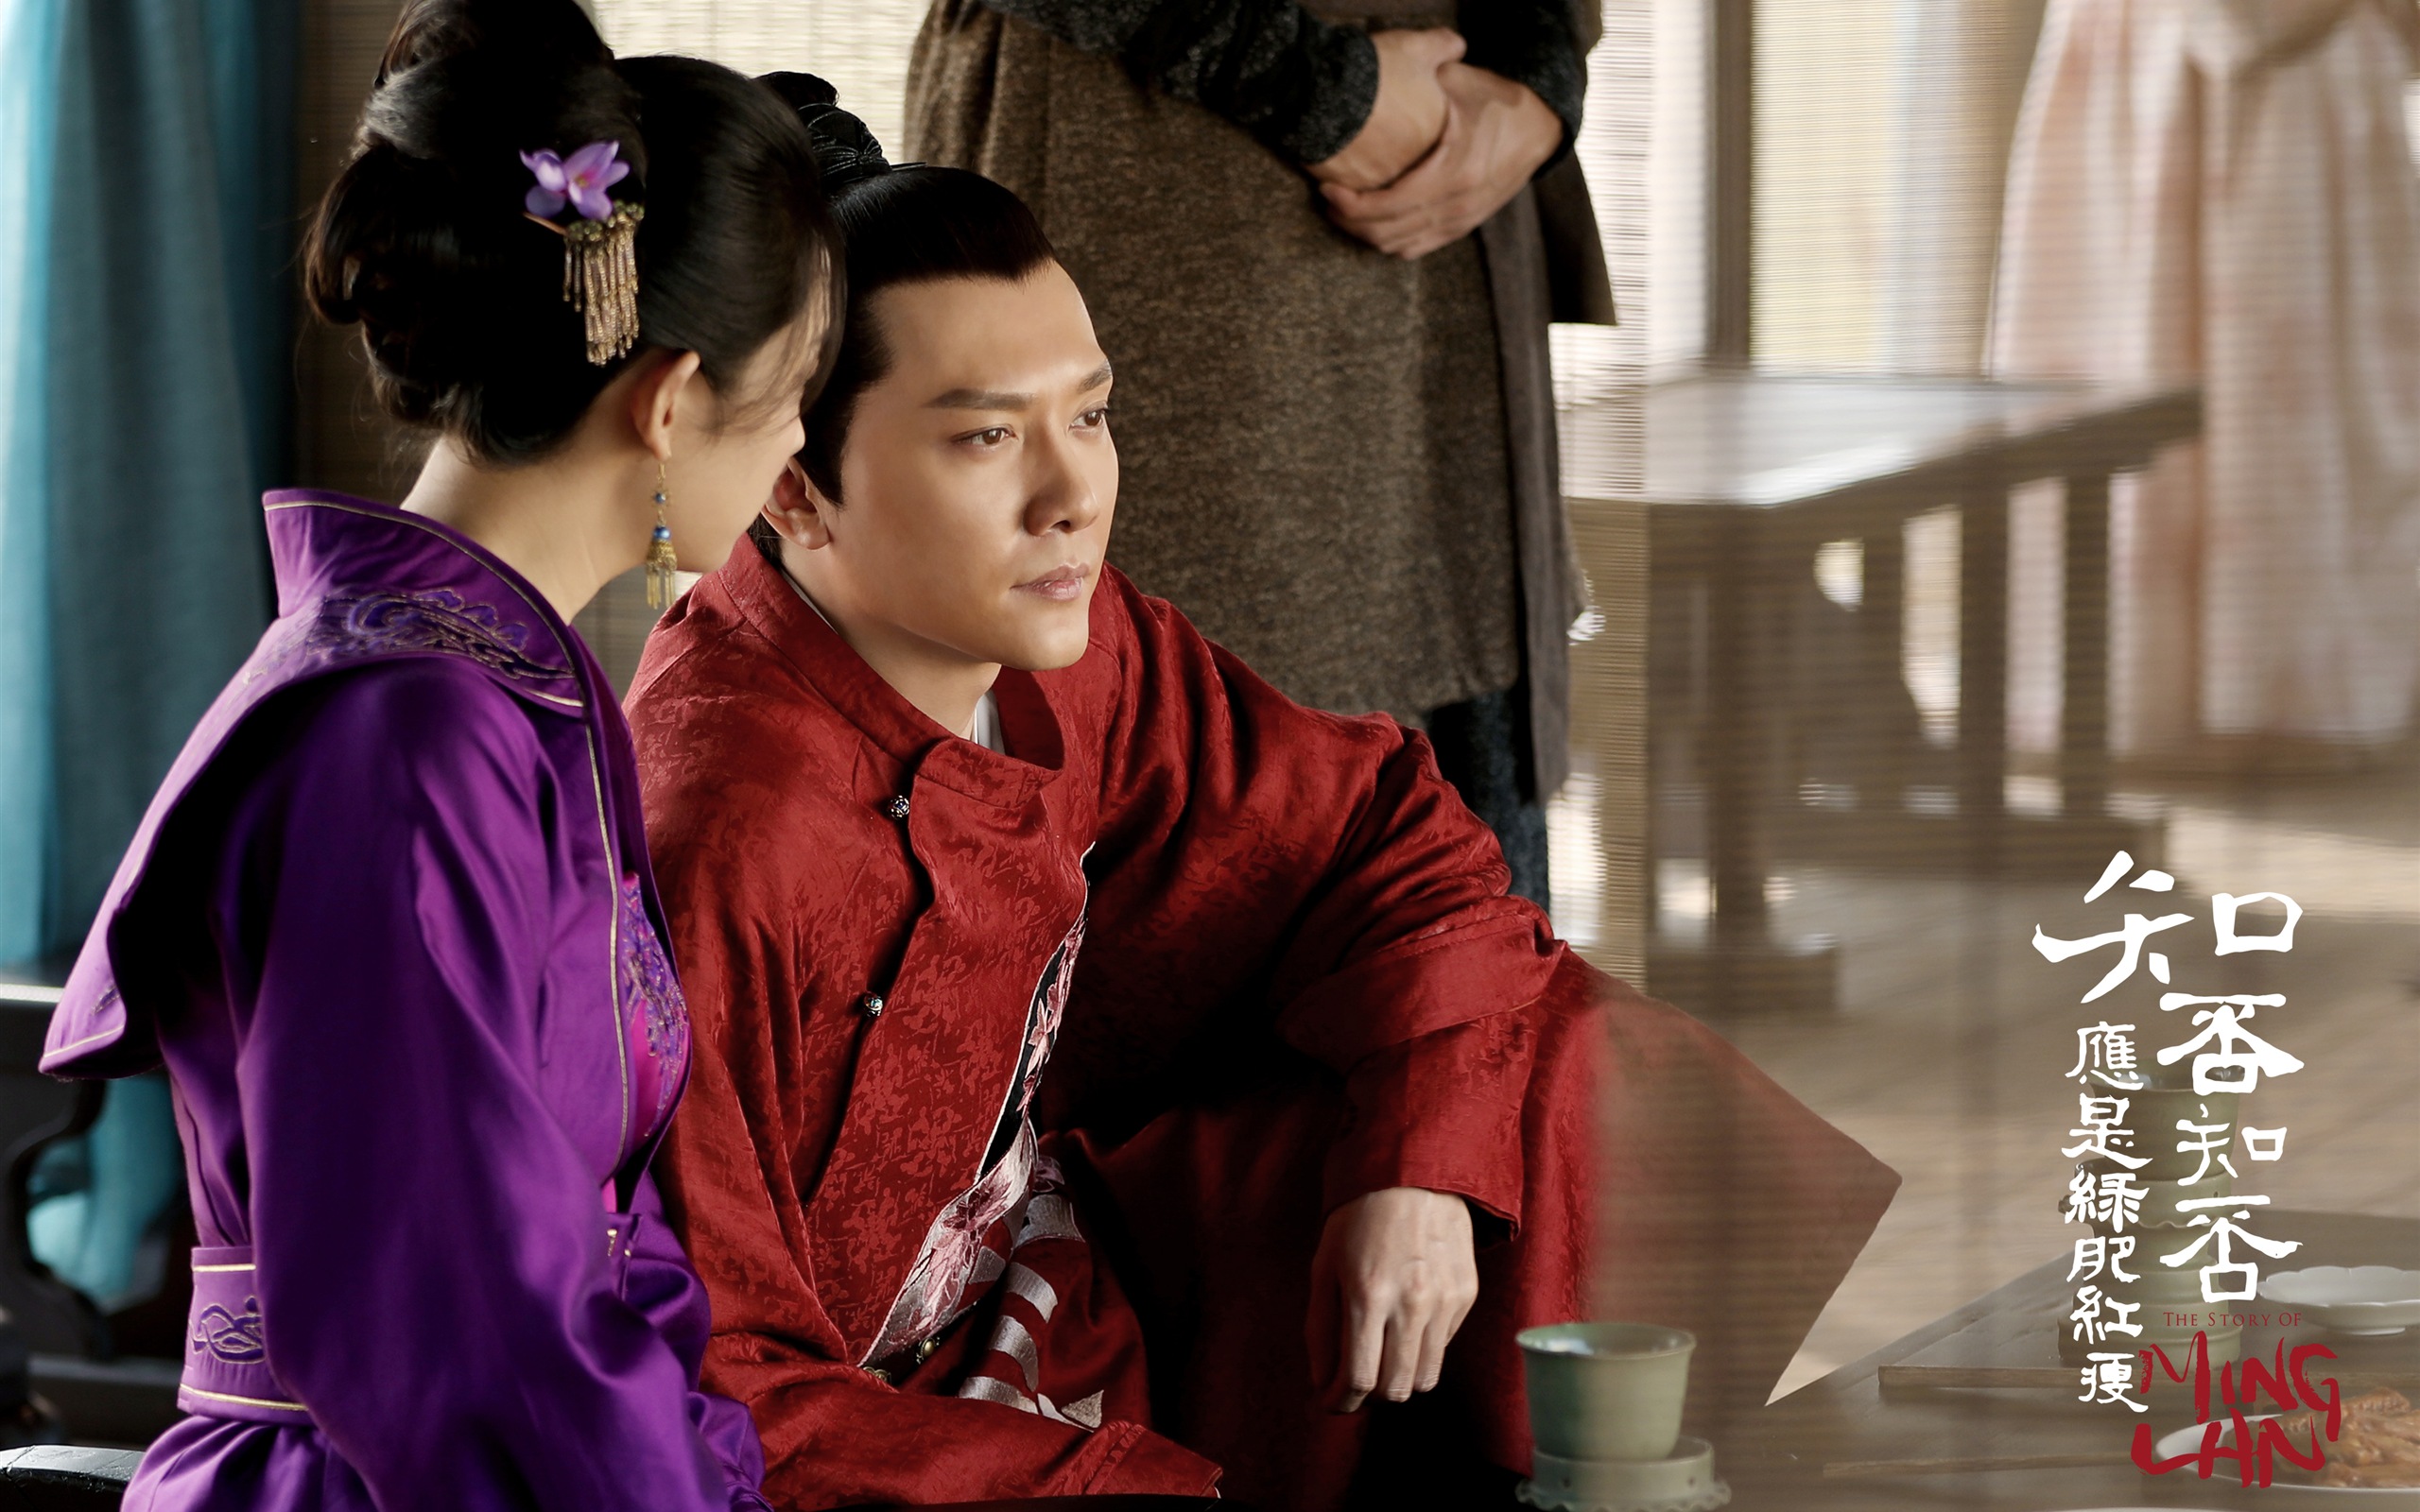 The Story Of MingLan, TV series HD wallpapers #42 - 2560x1600